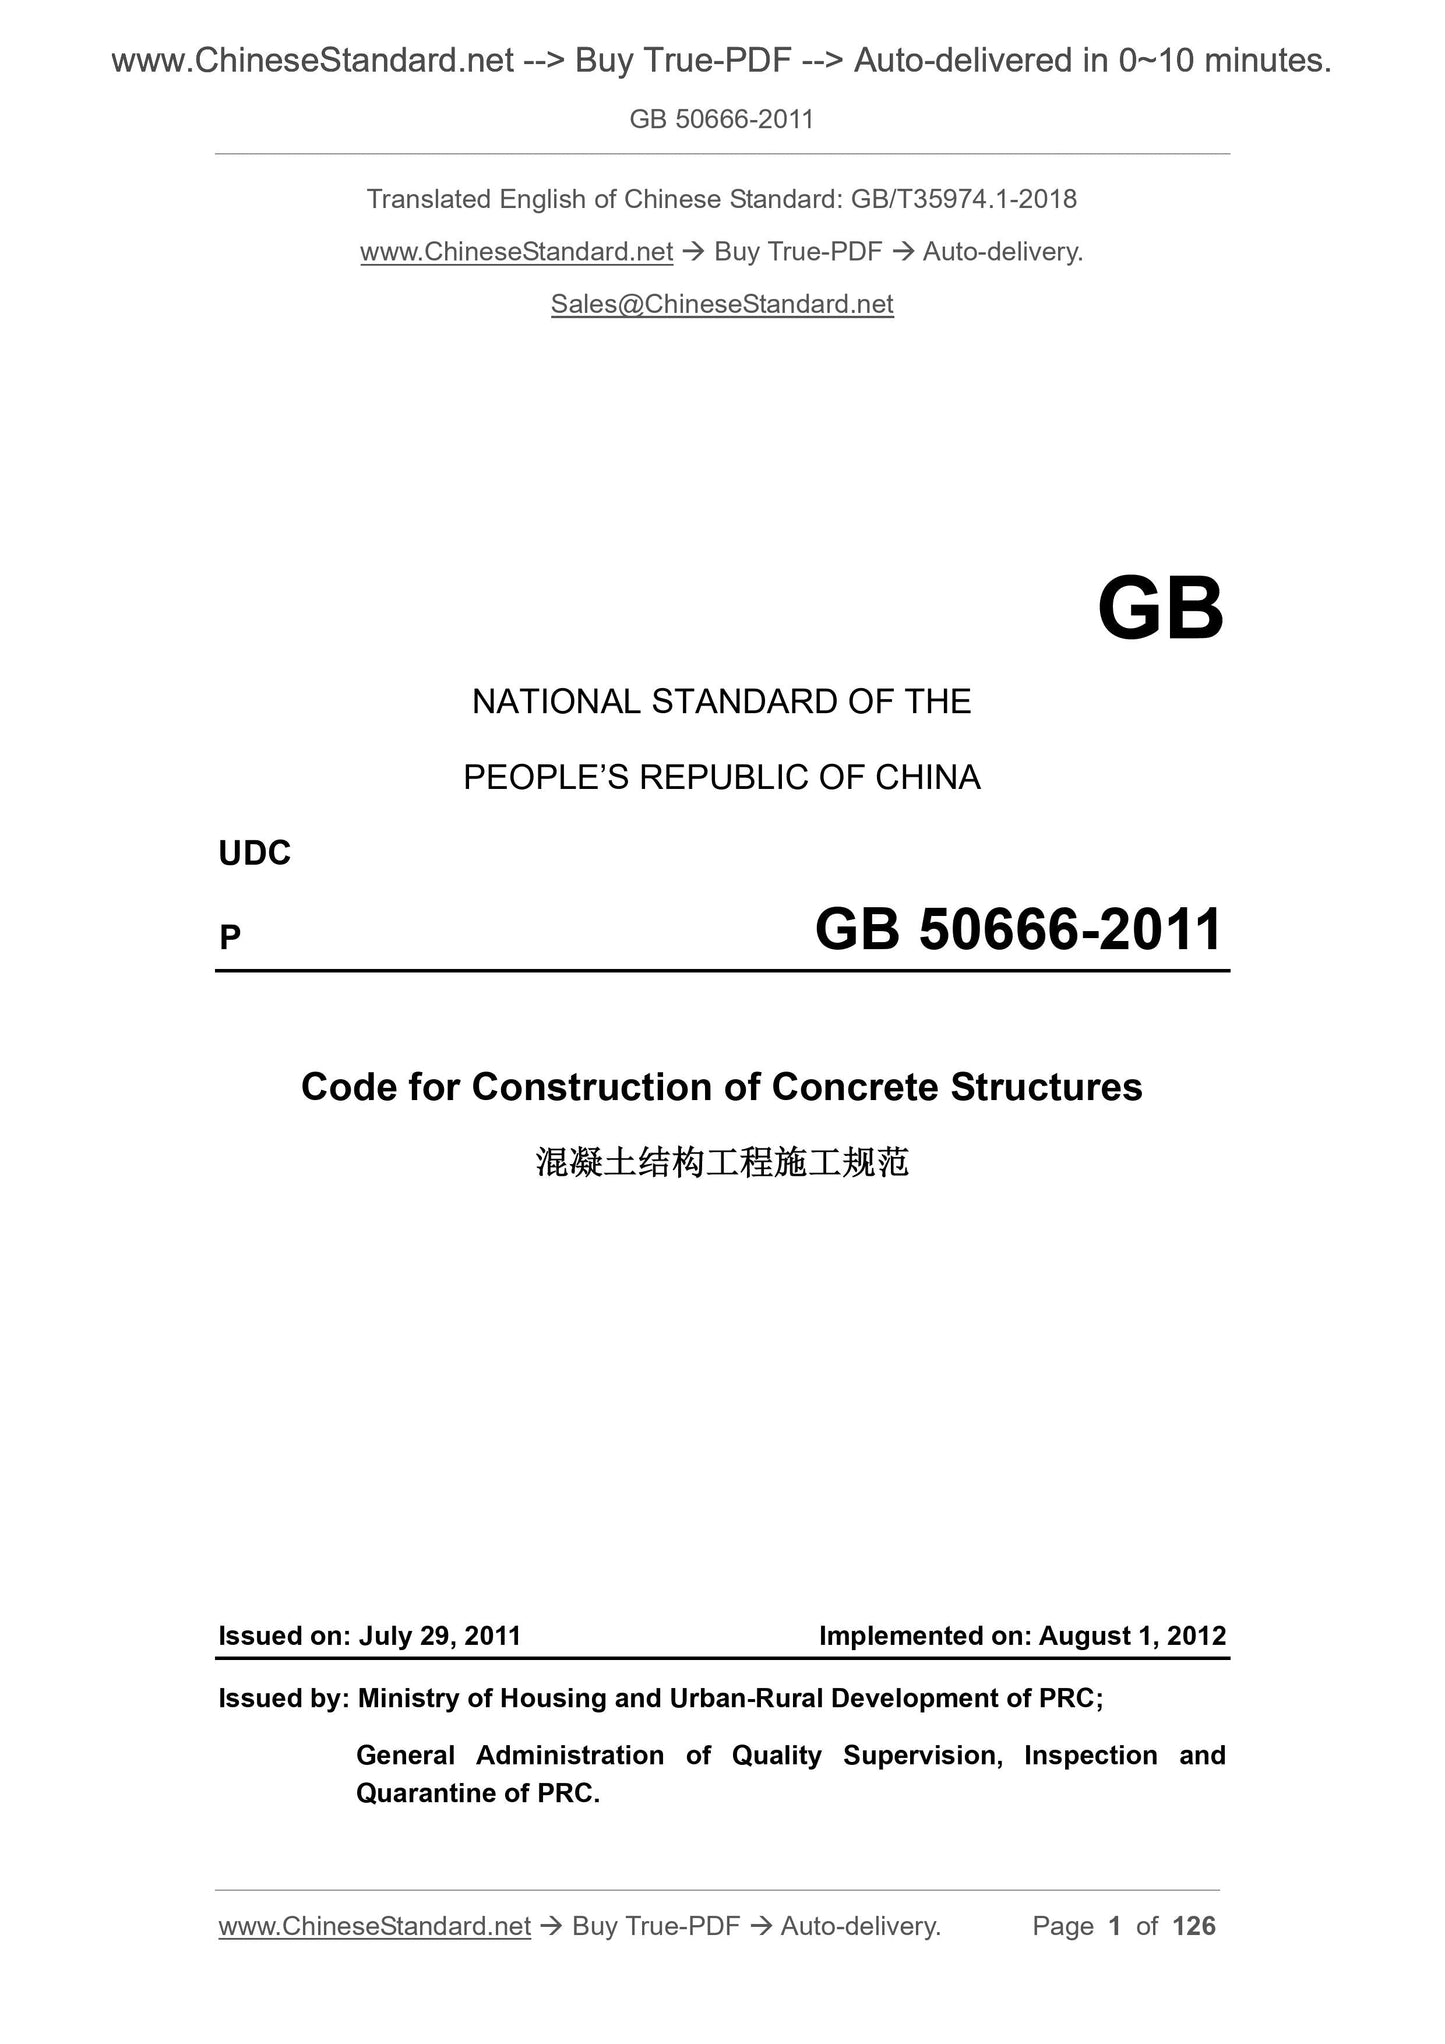 GB 50666-2011 Page 1